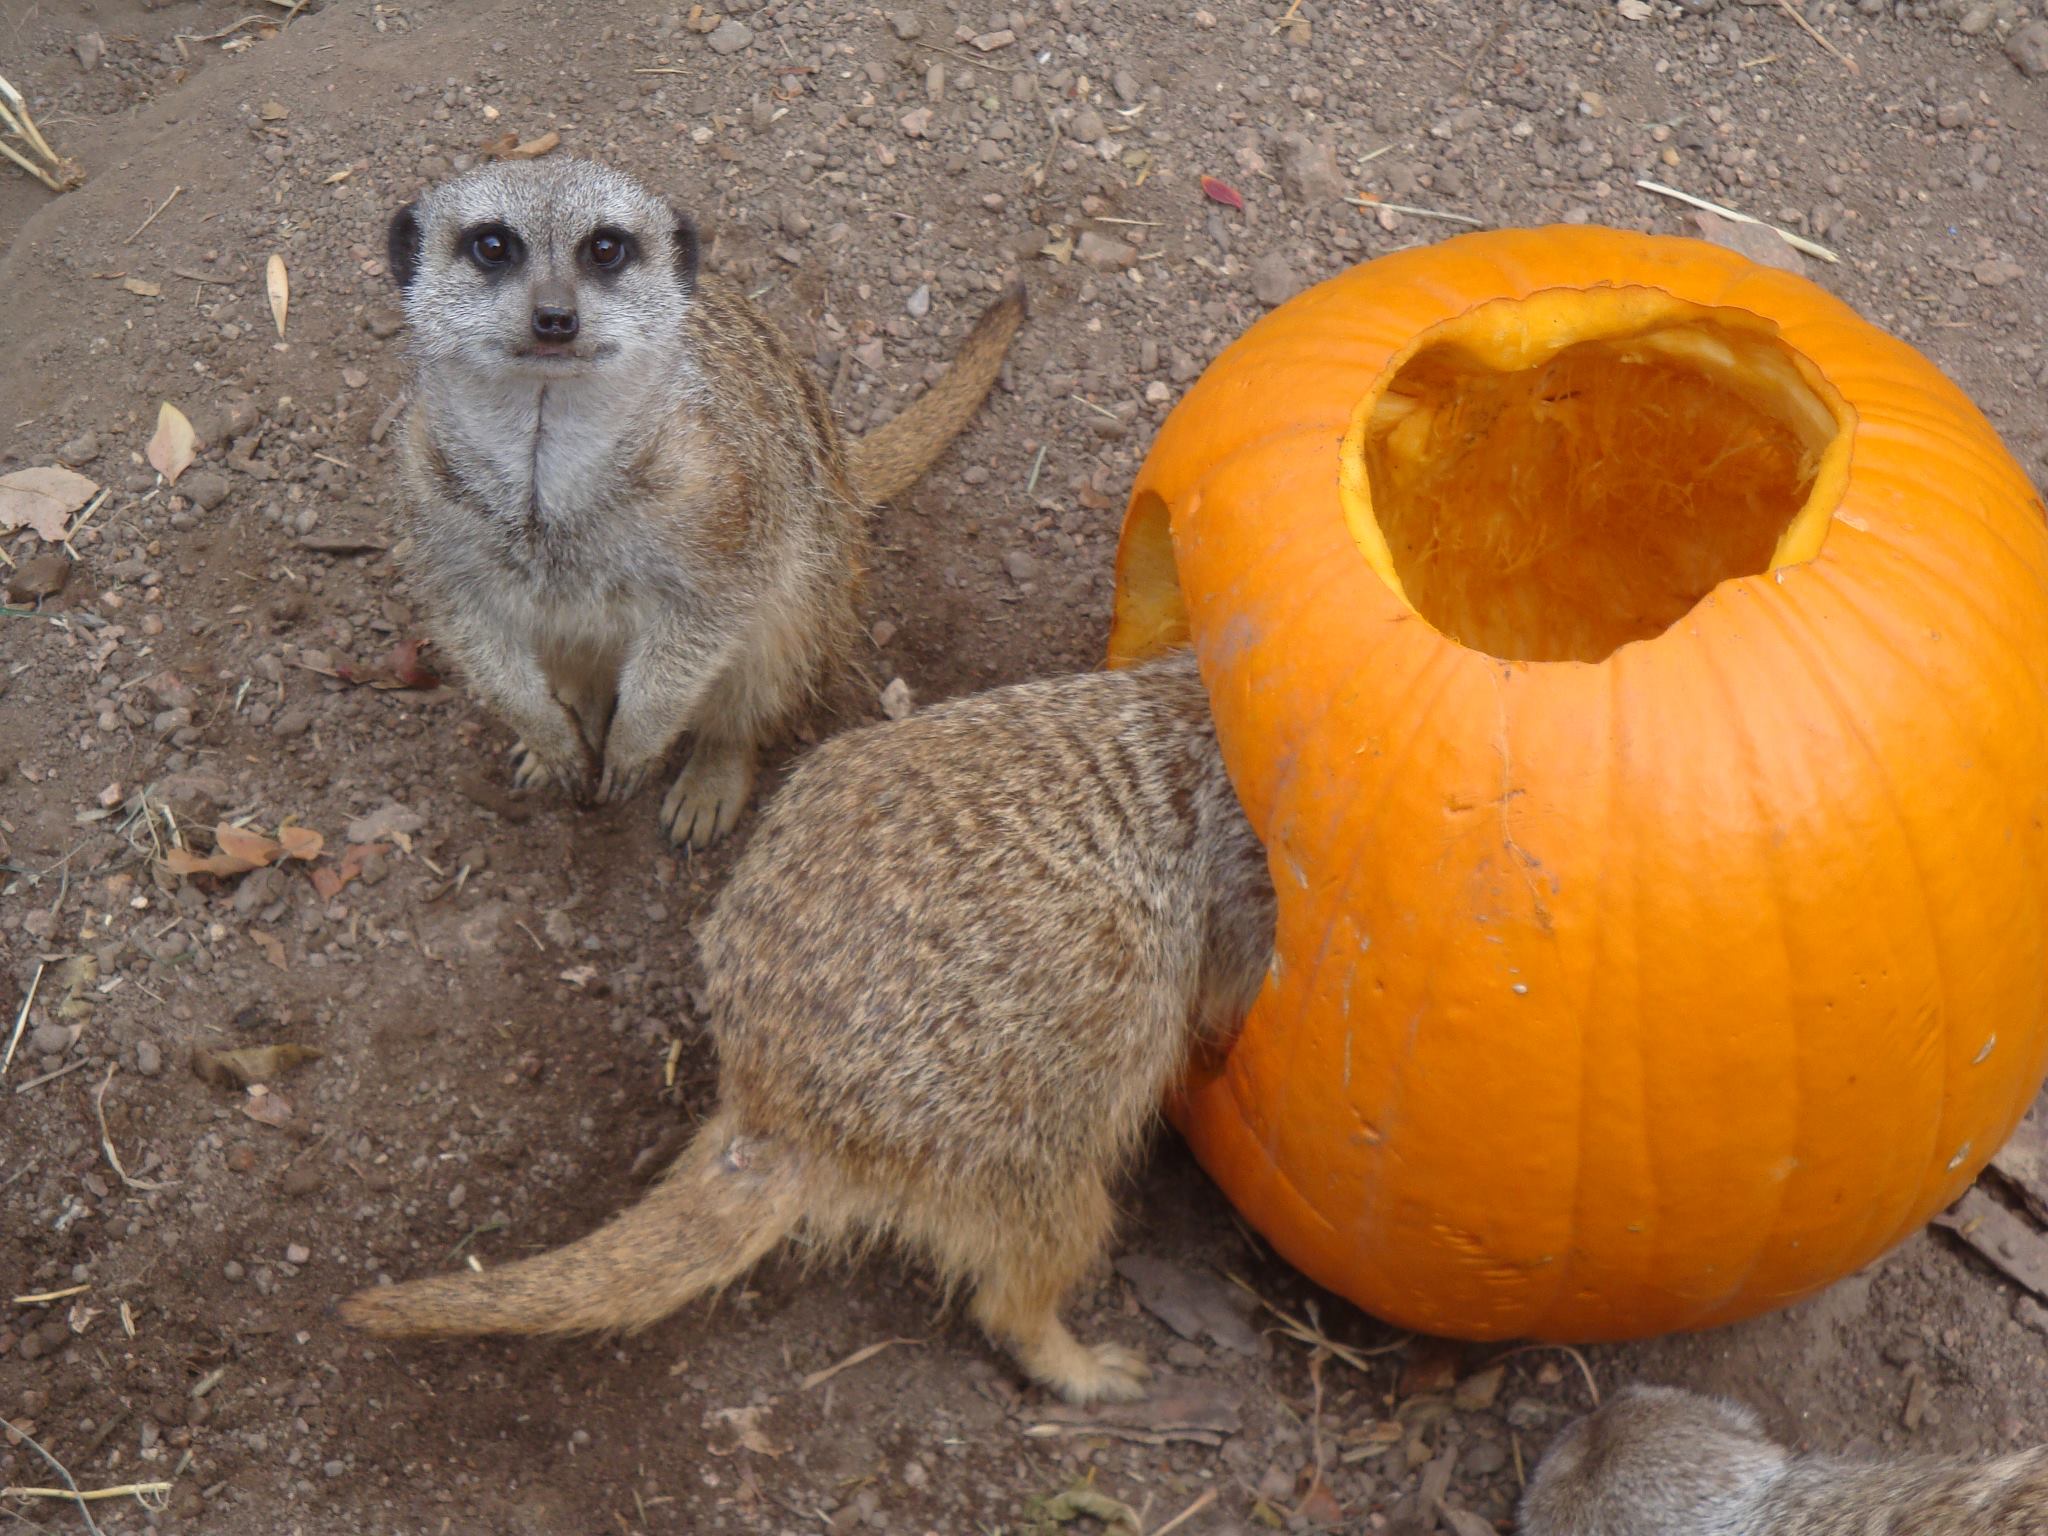 Two meerkats playing in and around a carved pumpkin